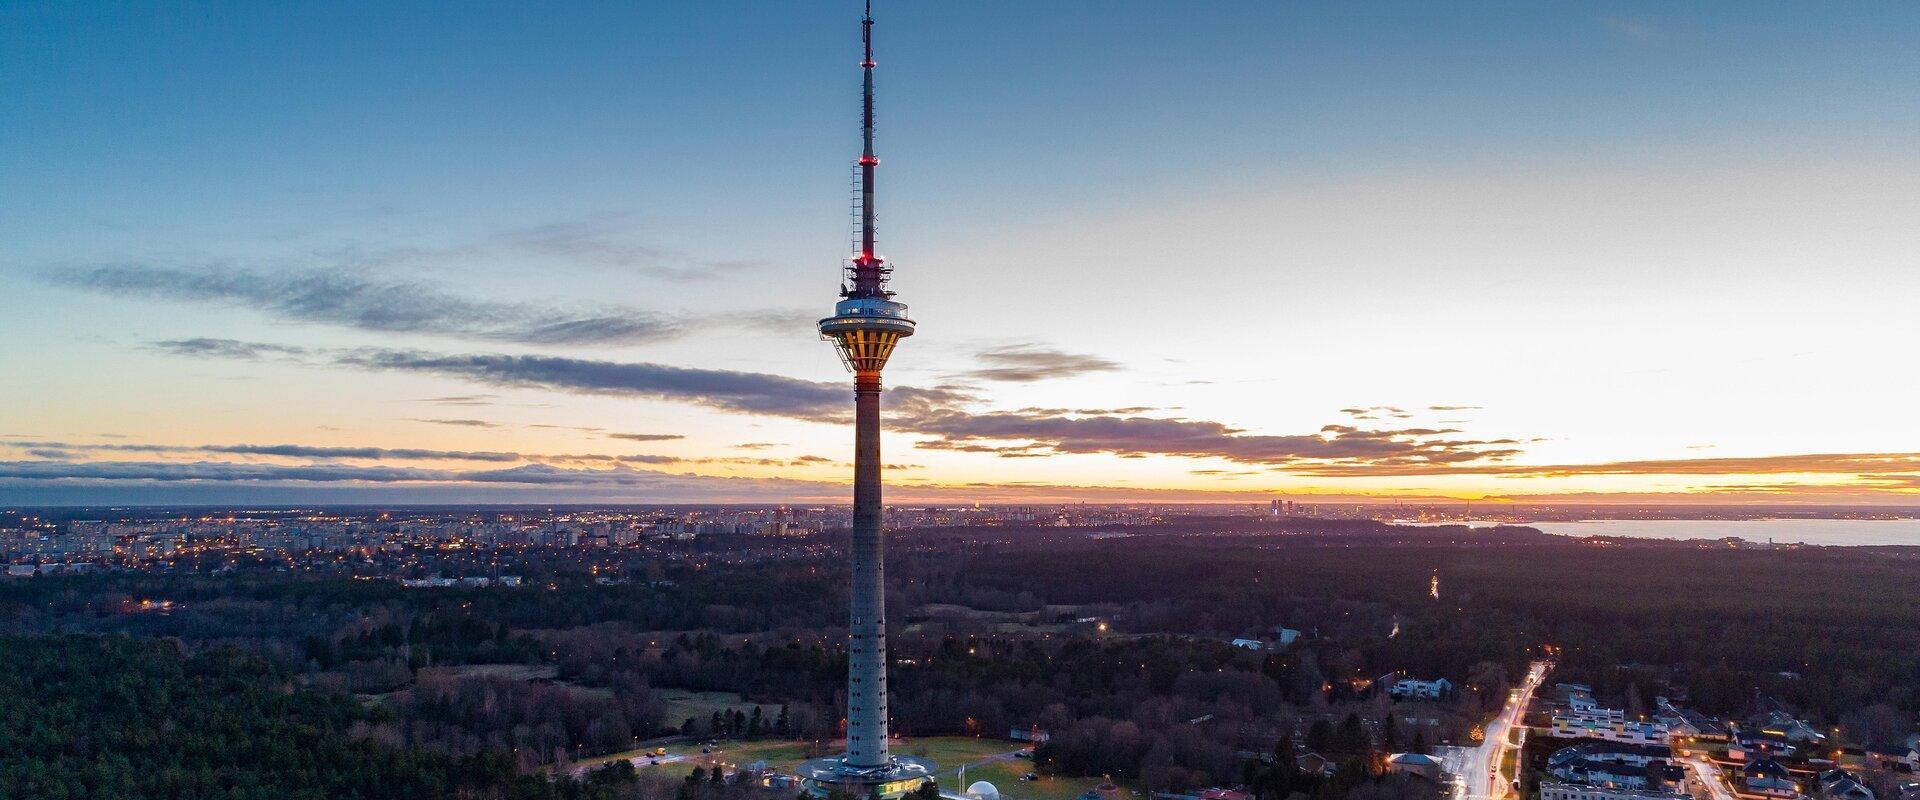 Tallinn TV Tower is the heart of ground-breaking events! Tallinn TV Tower was built in 1980 for the Summer Olympics in Moscow, and on 20 August 1991 i